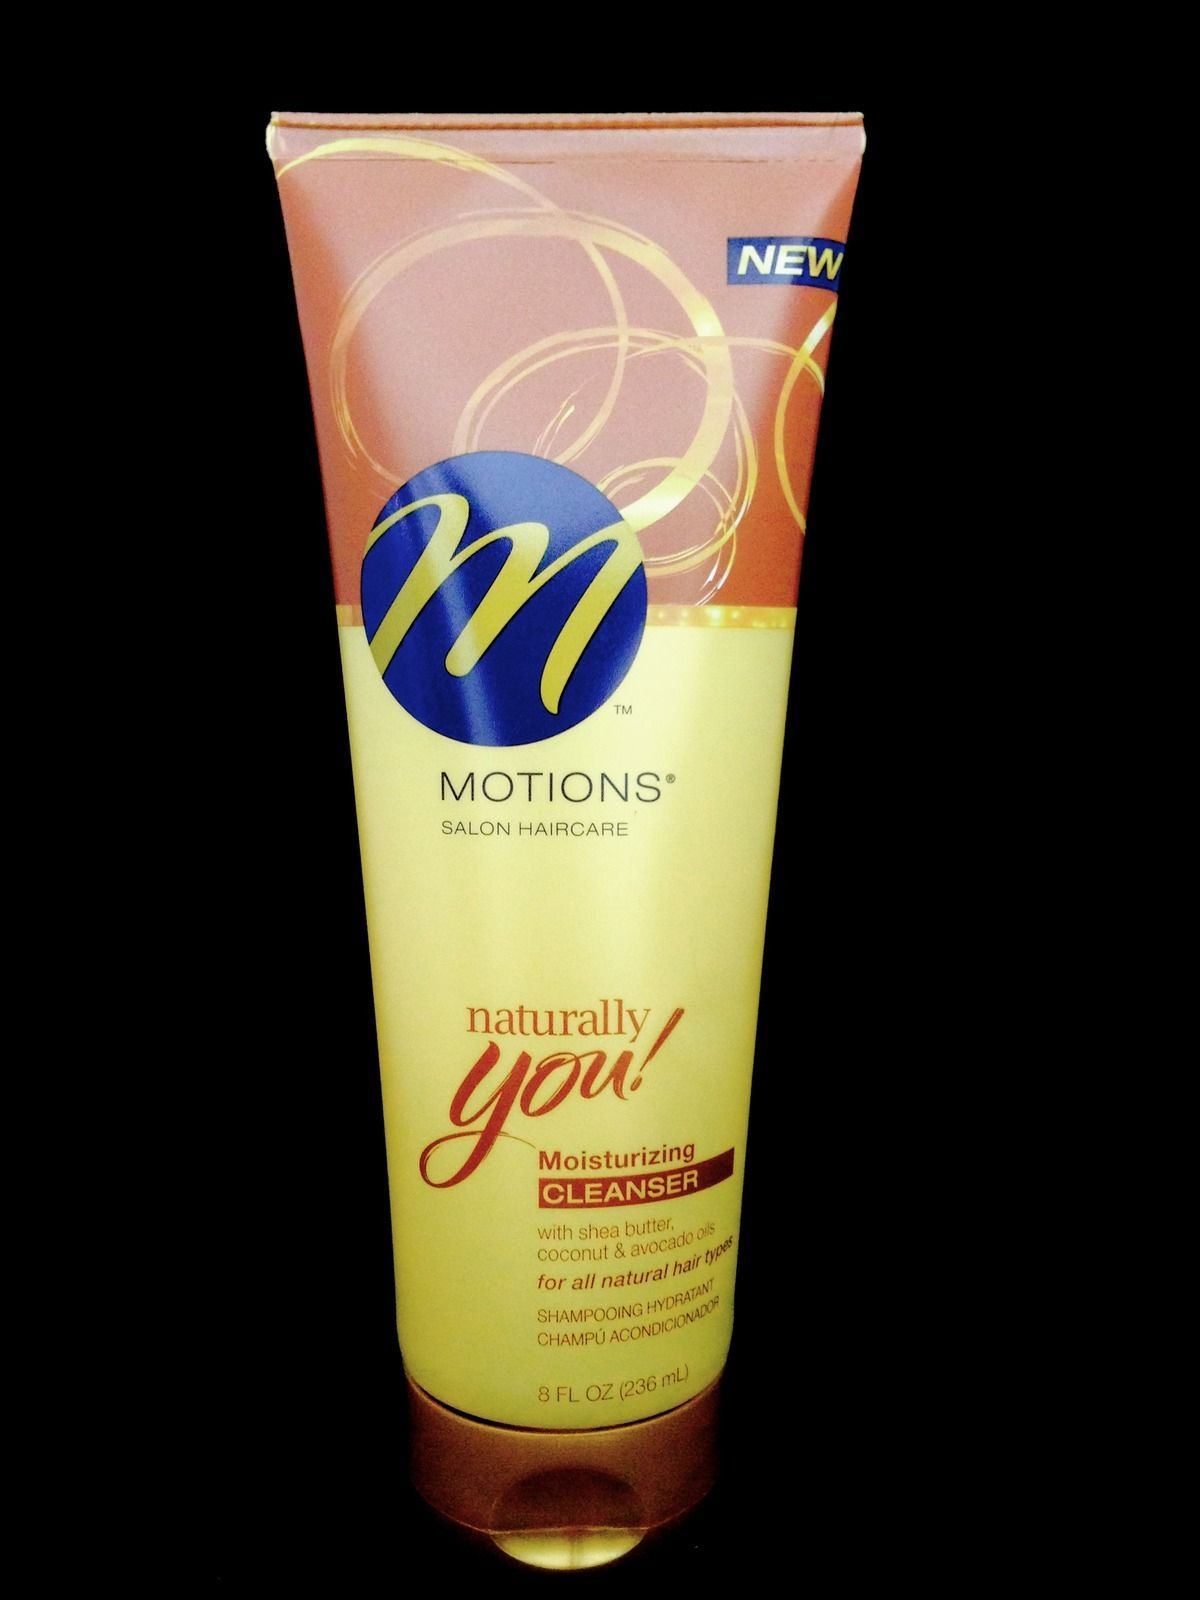 MOTIONS NATURALLY YOU MOISTURIZING CLEANSER FOR NATURAL HAIR TYPES 8oz - $7.89